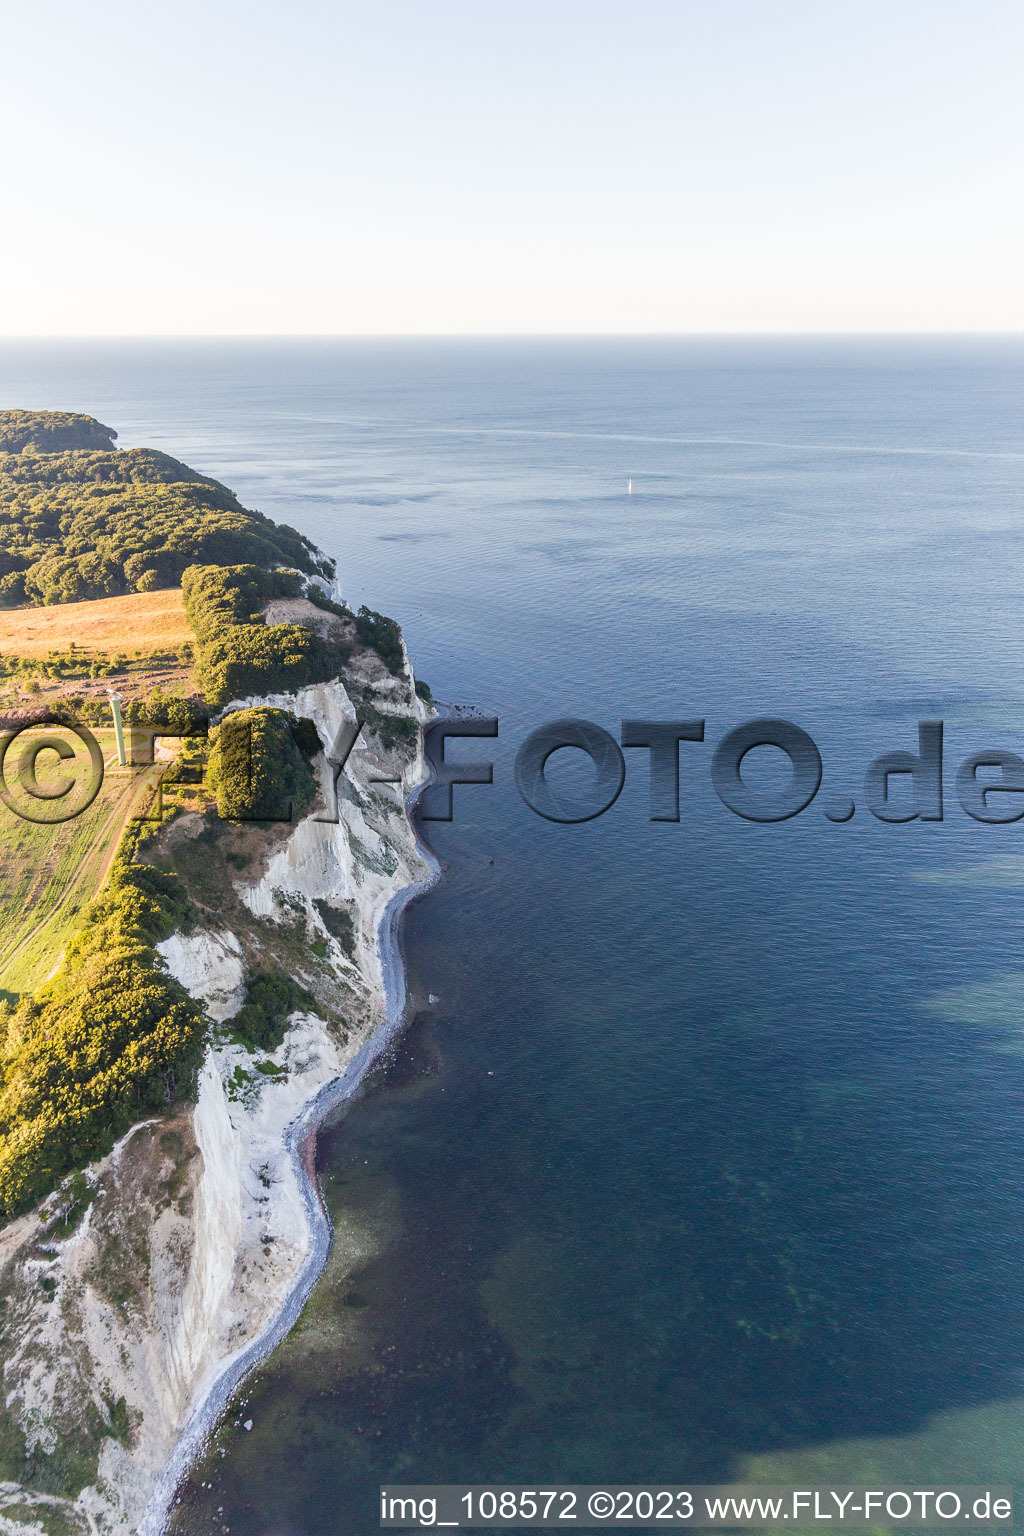 Borre in the state Zealand, Denmark seen from a drone